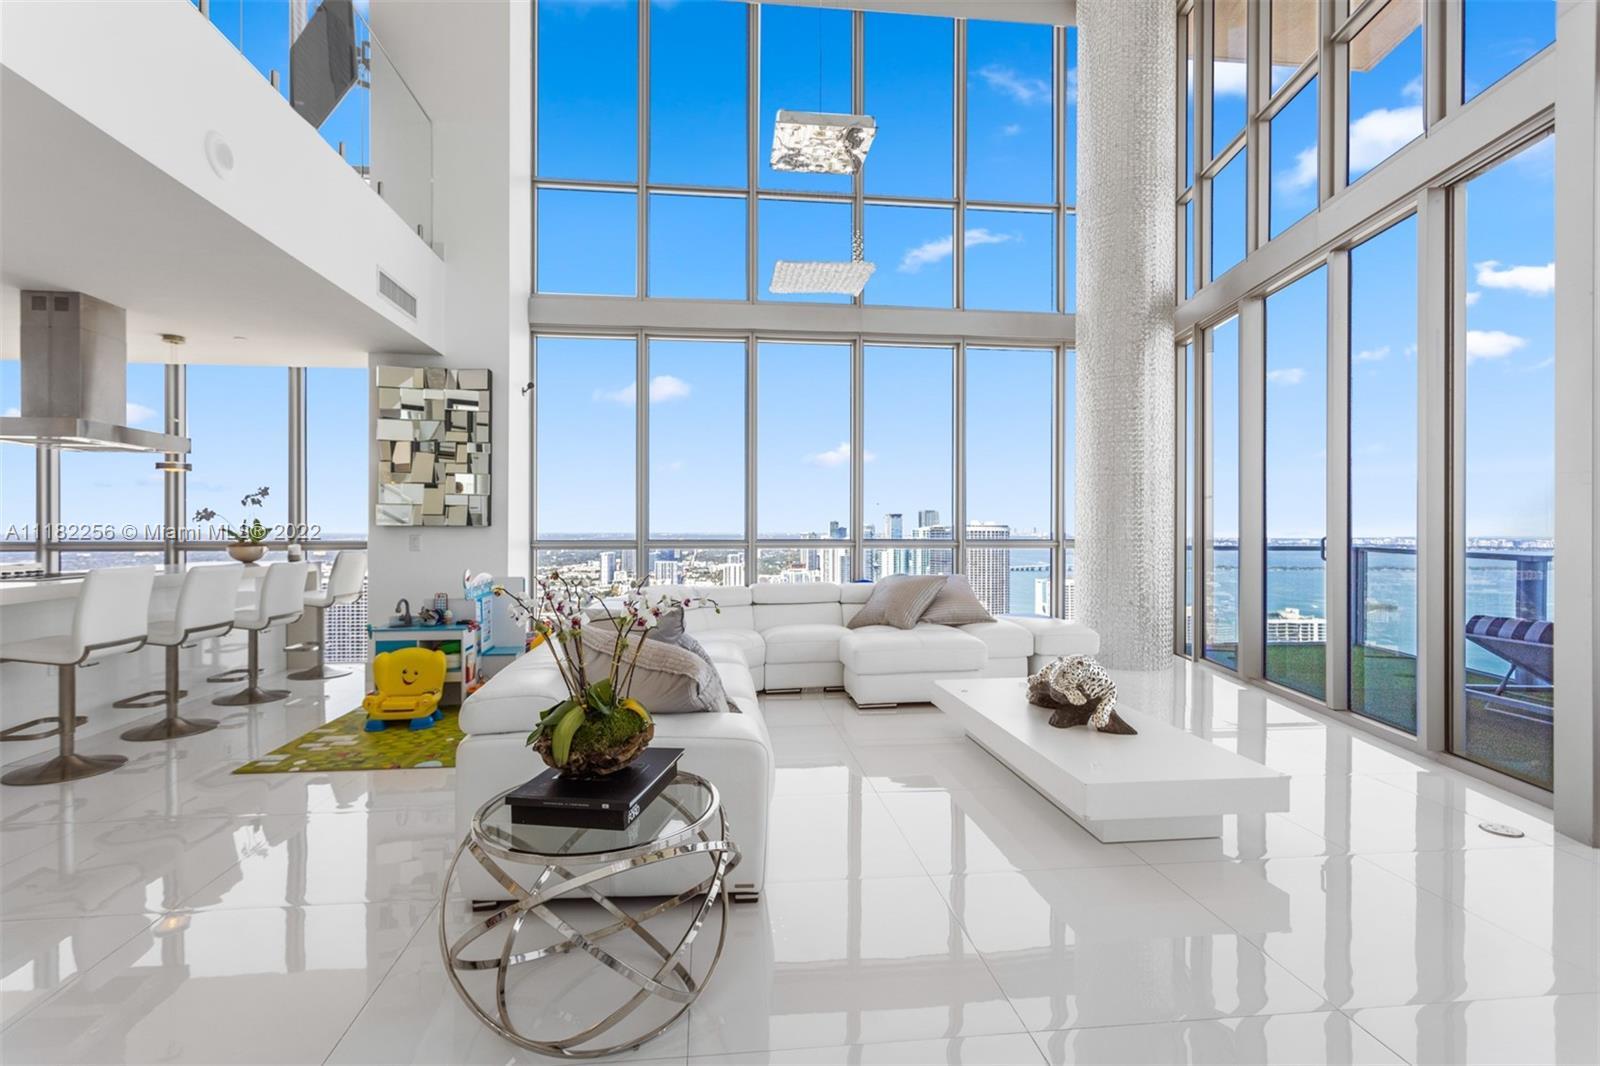 A MUST SEE - STUNNING - ENDLESS WATER VIEWS OF BISCAYNE BAY, MIAMI BEACH, AND MORE FROM THIS ONE OF 